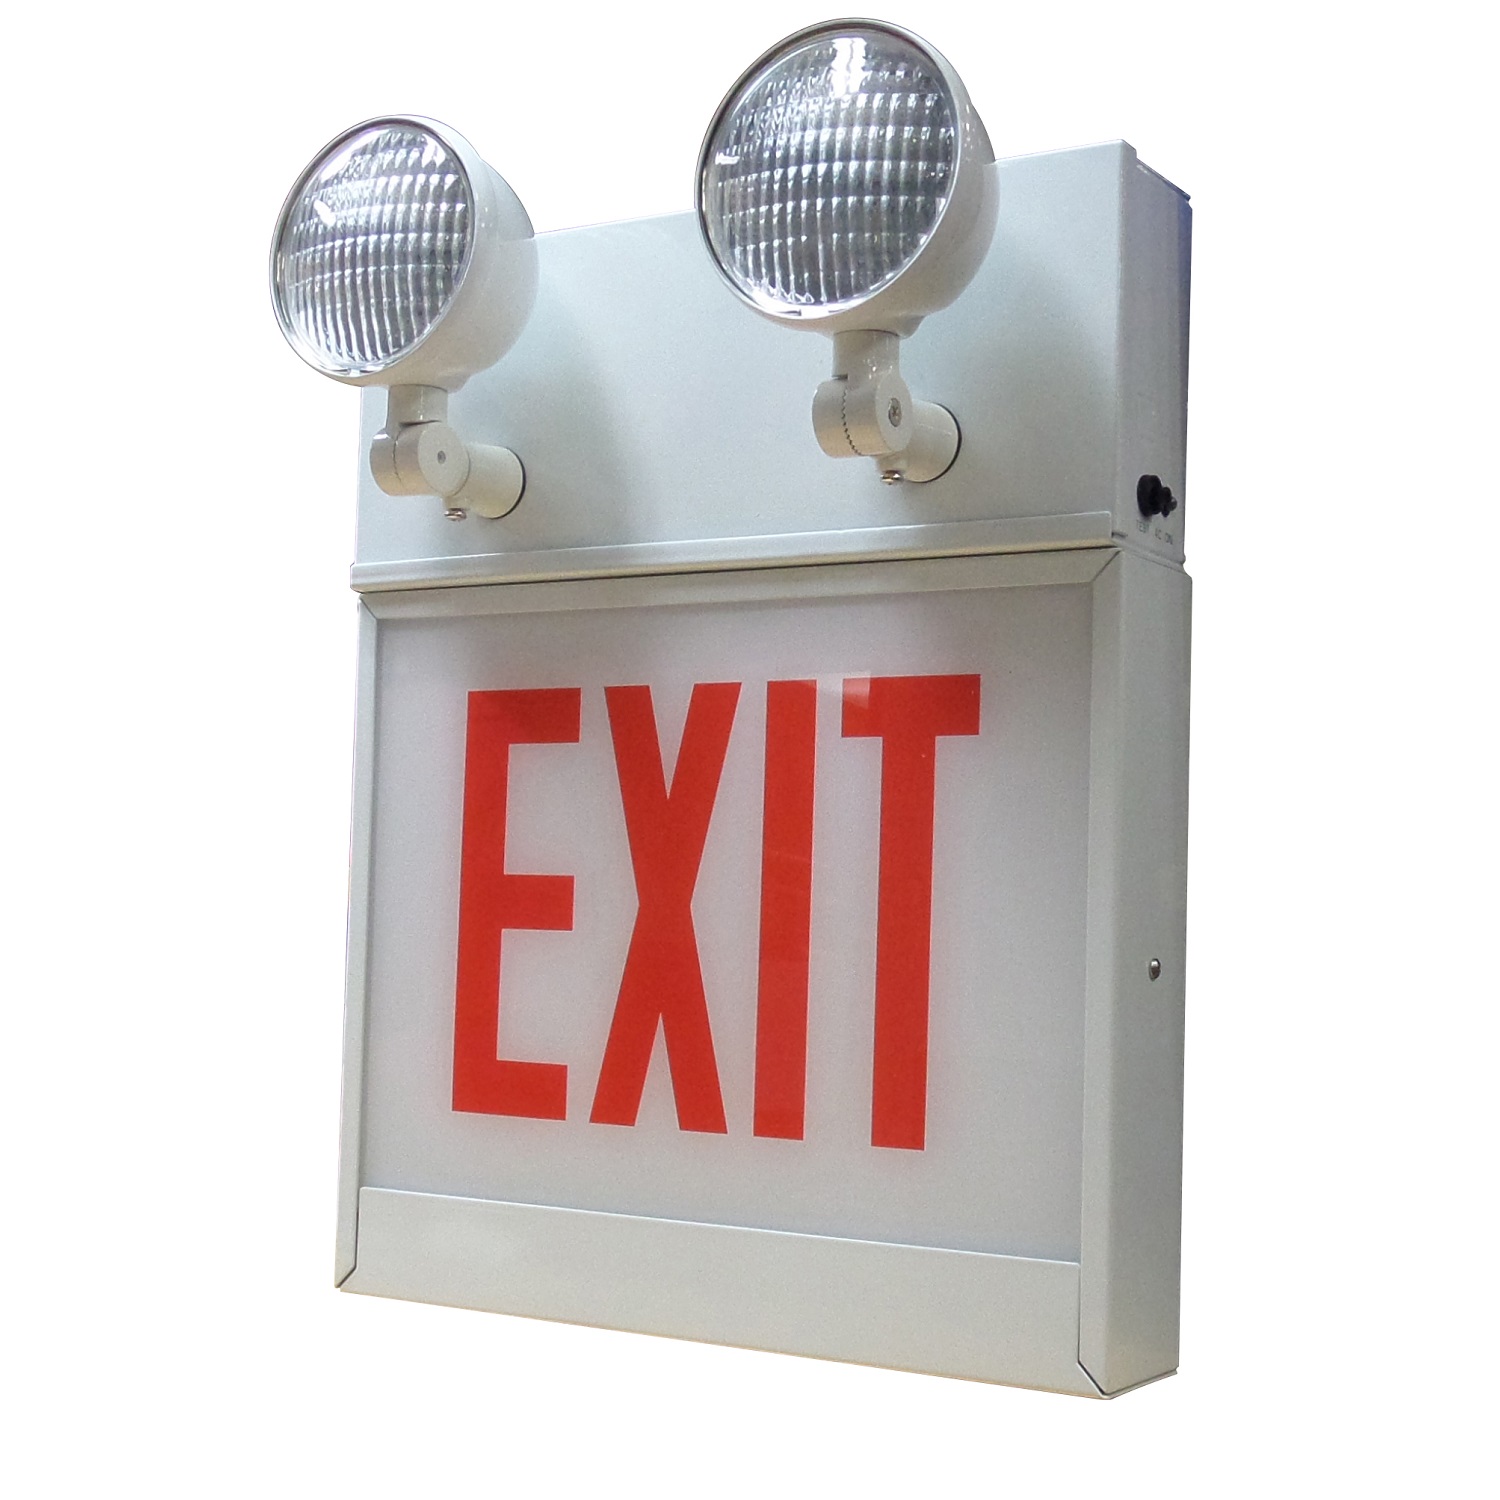 LED EXIT/STAIR SIGN & EMERGENCY STEEL COMBO CALEDCXTEU